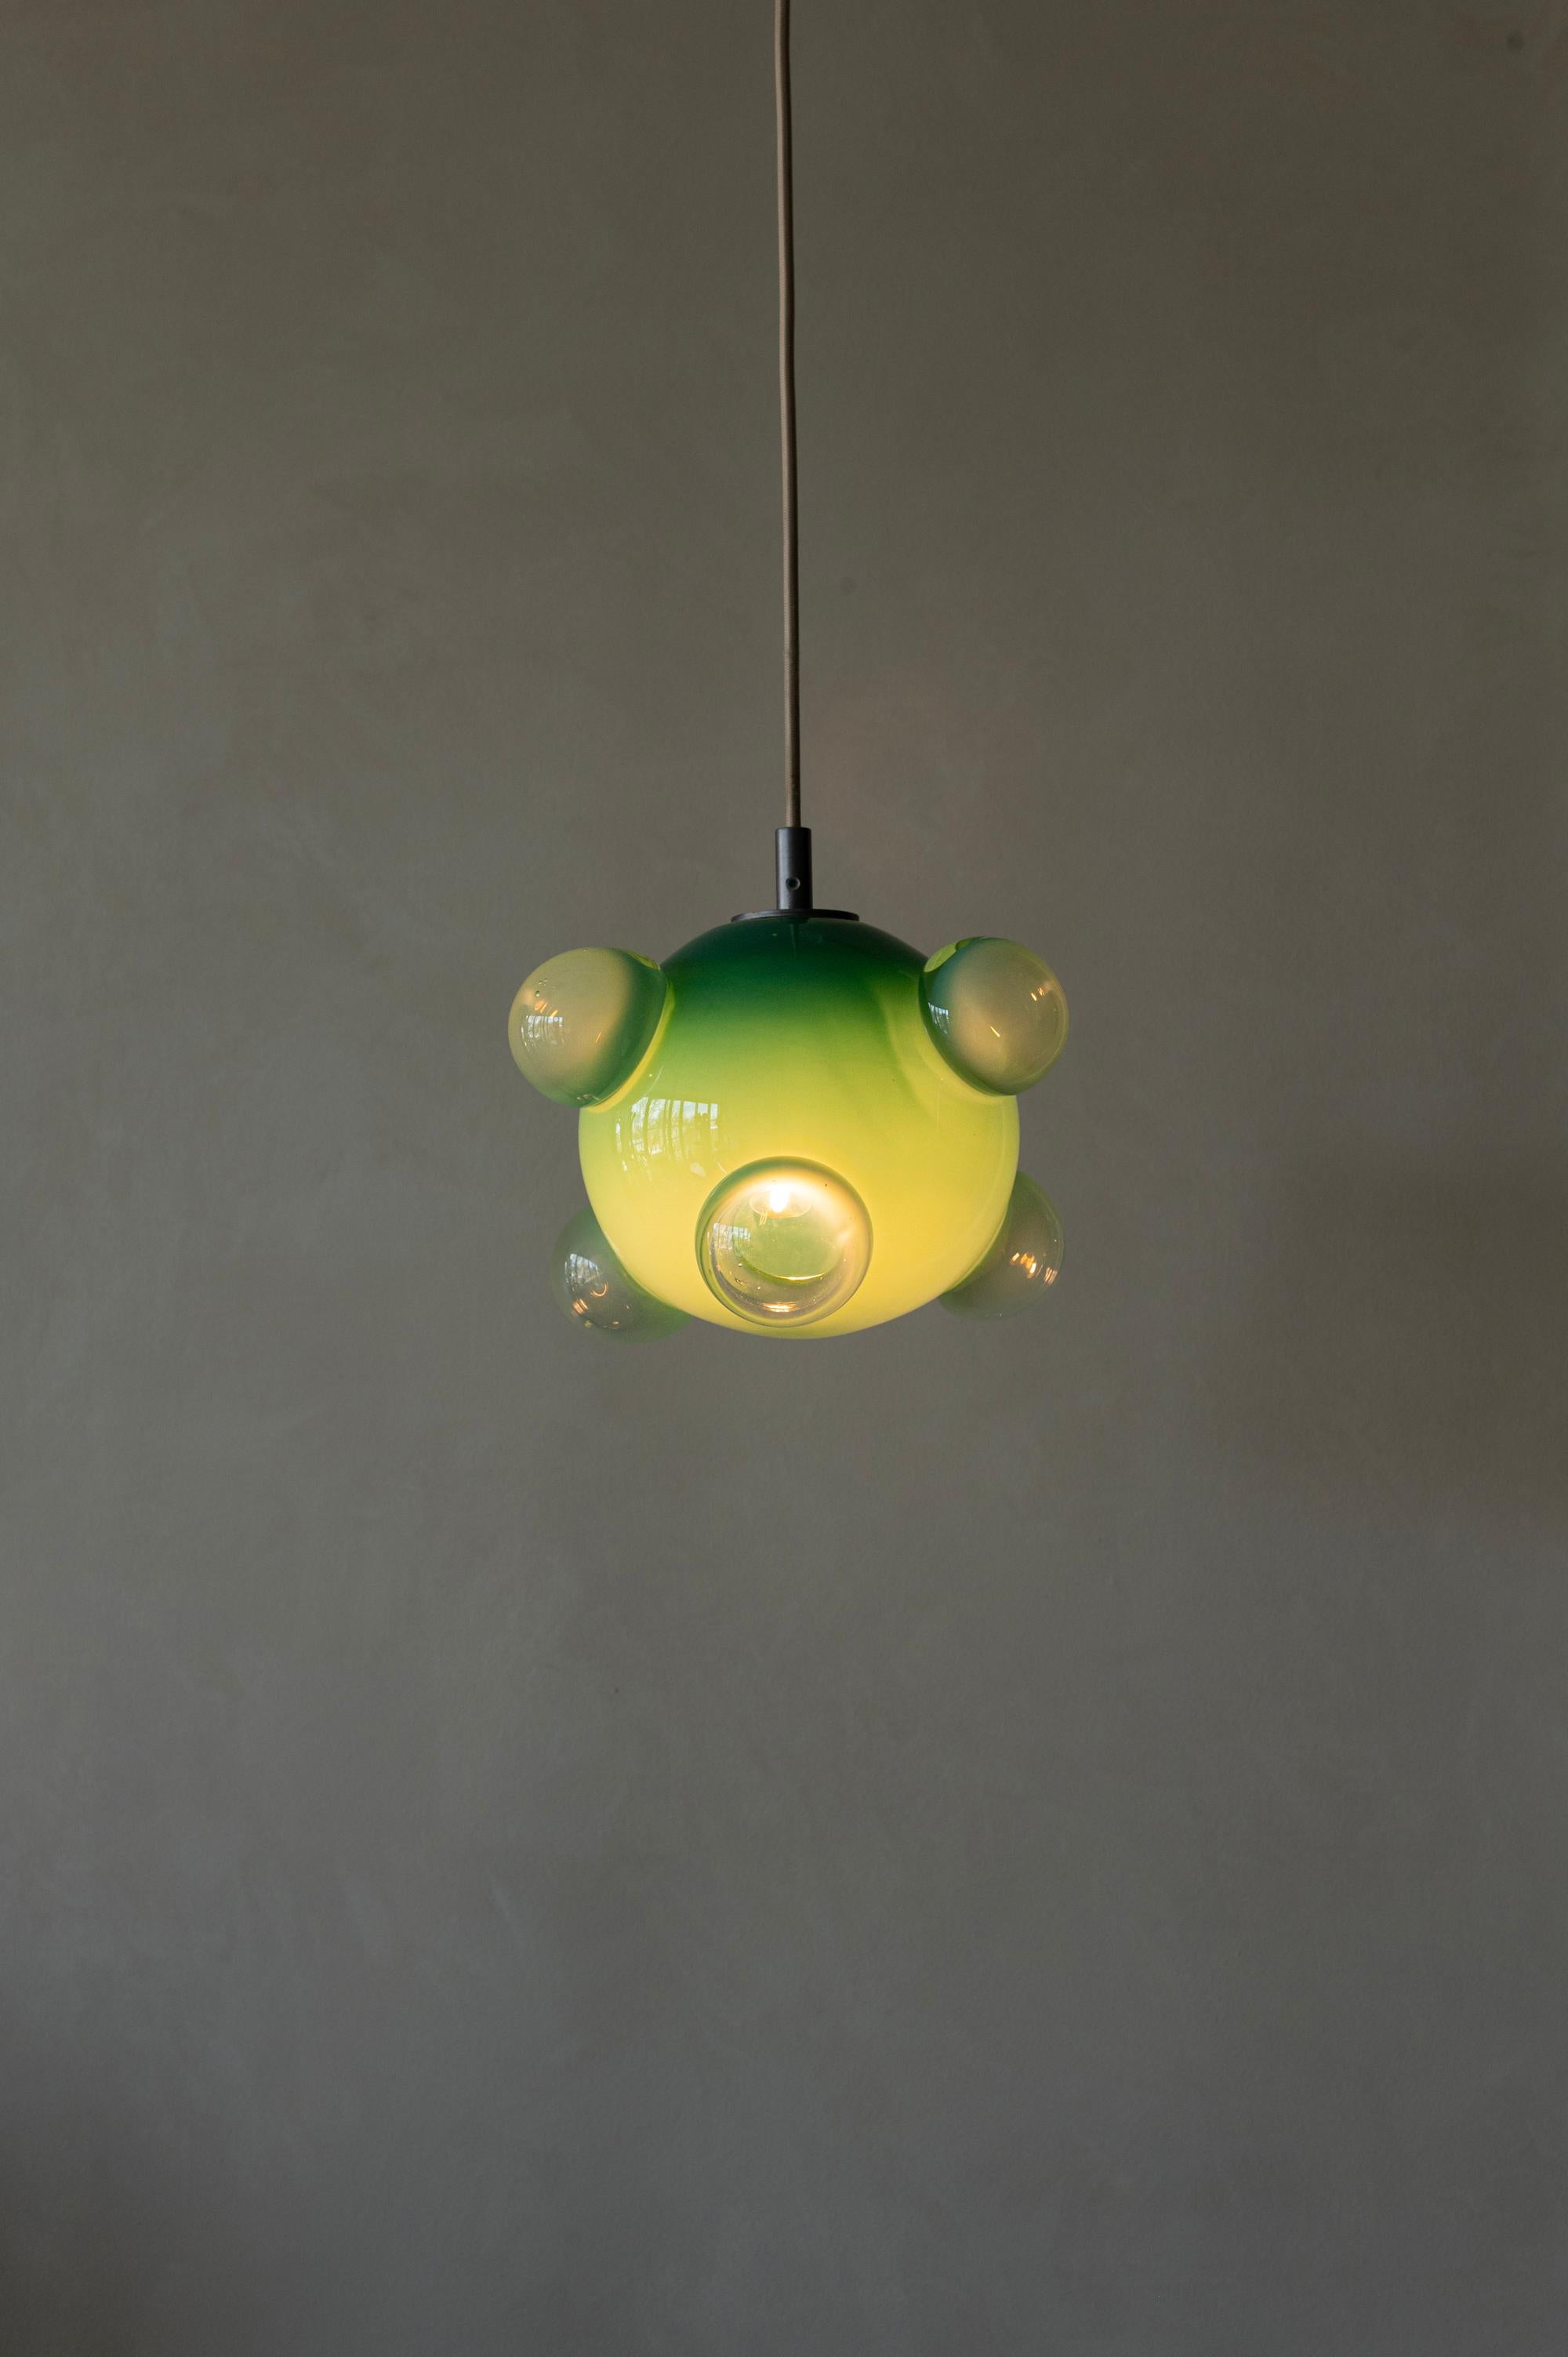 One of Sticky Glass's most classic styles, suspended from the ceiling! These bulbous pendants carry 6 exterior chambers that give a window into the heart of the pendant while also proving a unique optic dance. 

This form illuminates the fluid and